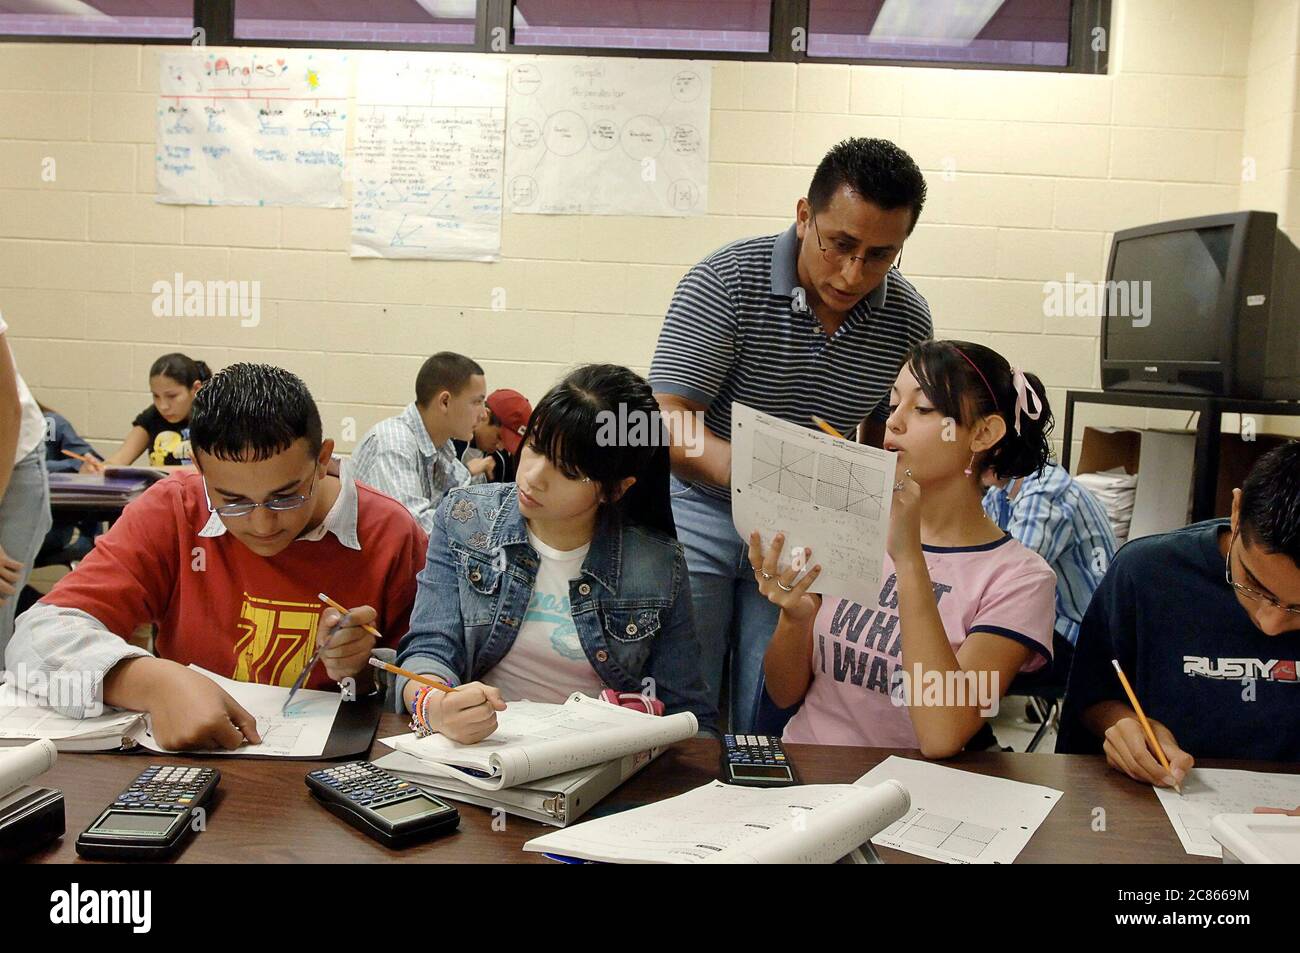 Brownsville, Texas USA, December 2 2005: Students at Lopez High School working on math problems in Algebra II classroom using hand-held scientific calculators. The student population of Lopez HS is over 99% Hispanic.  ©Bob Daemmrich Stock Photo